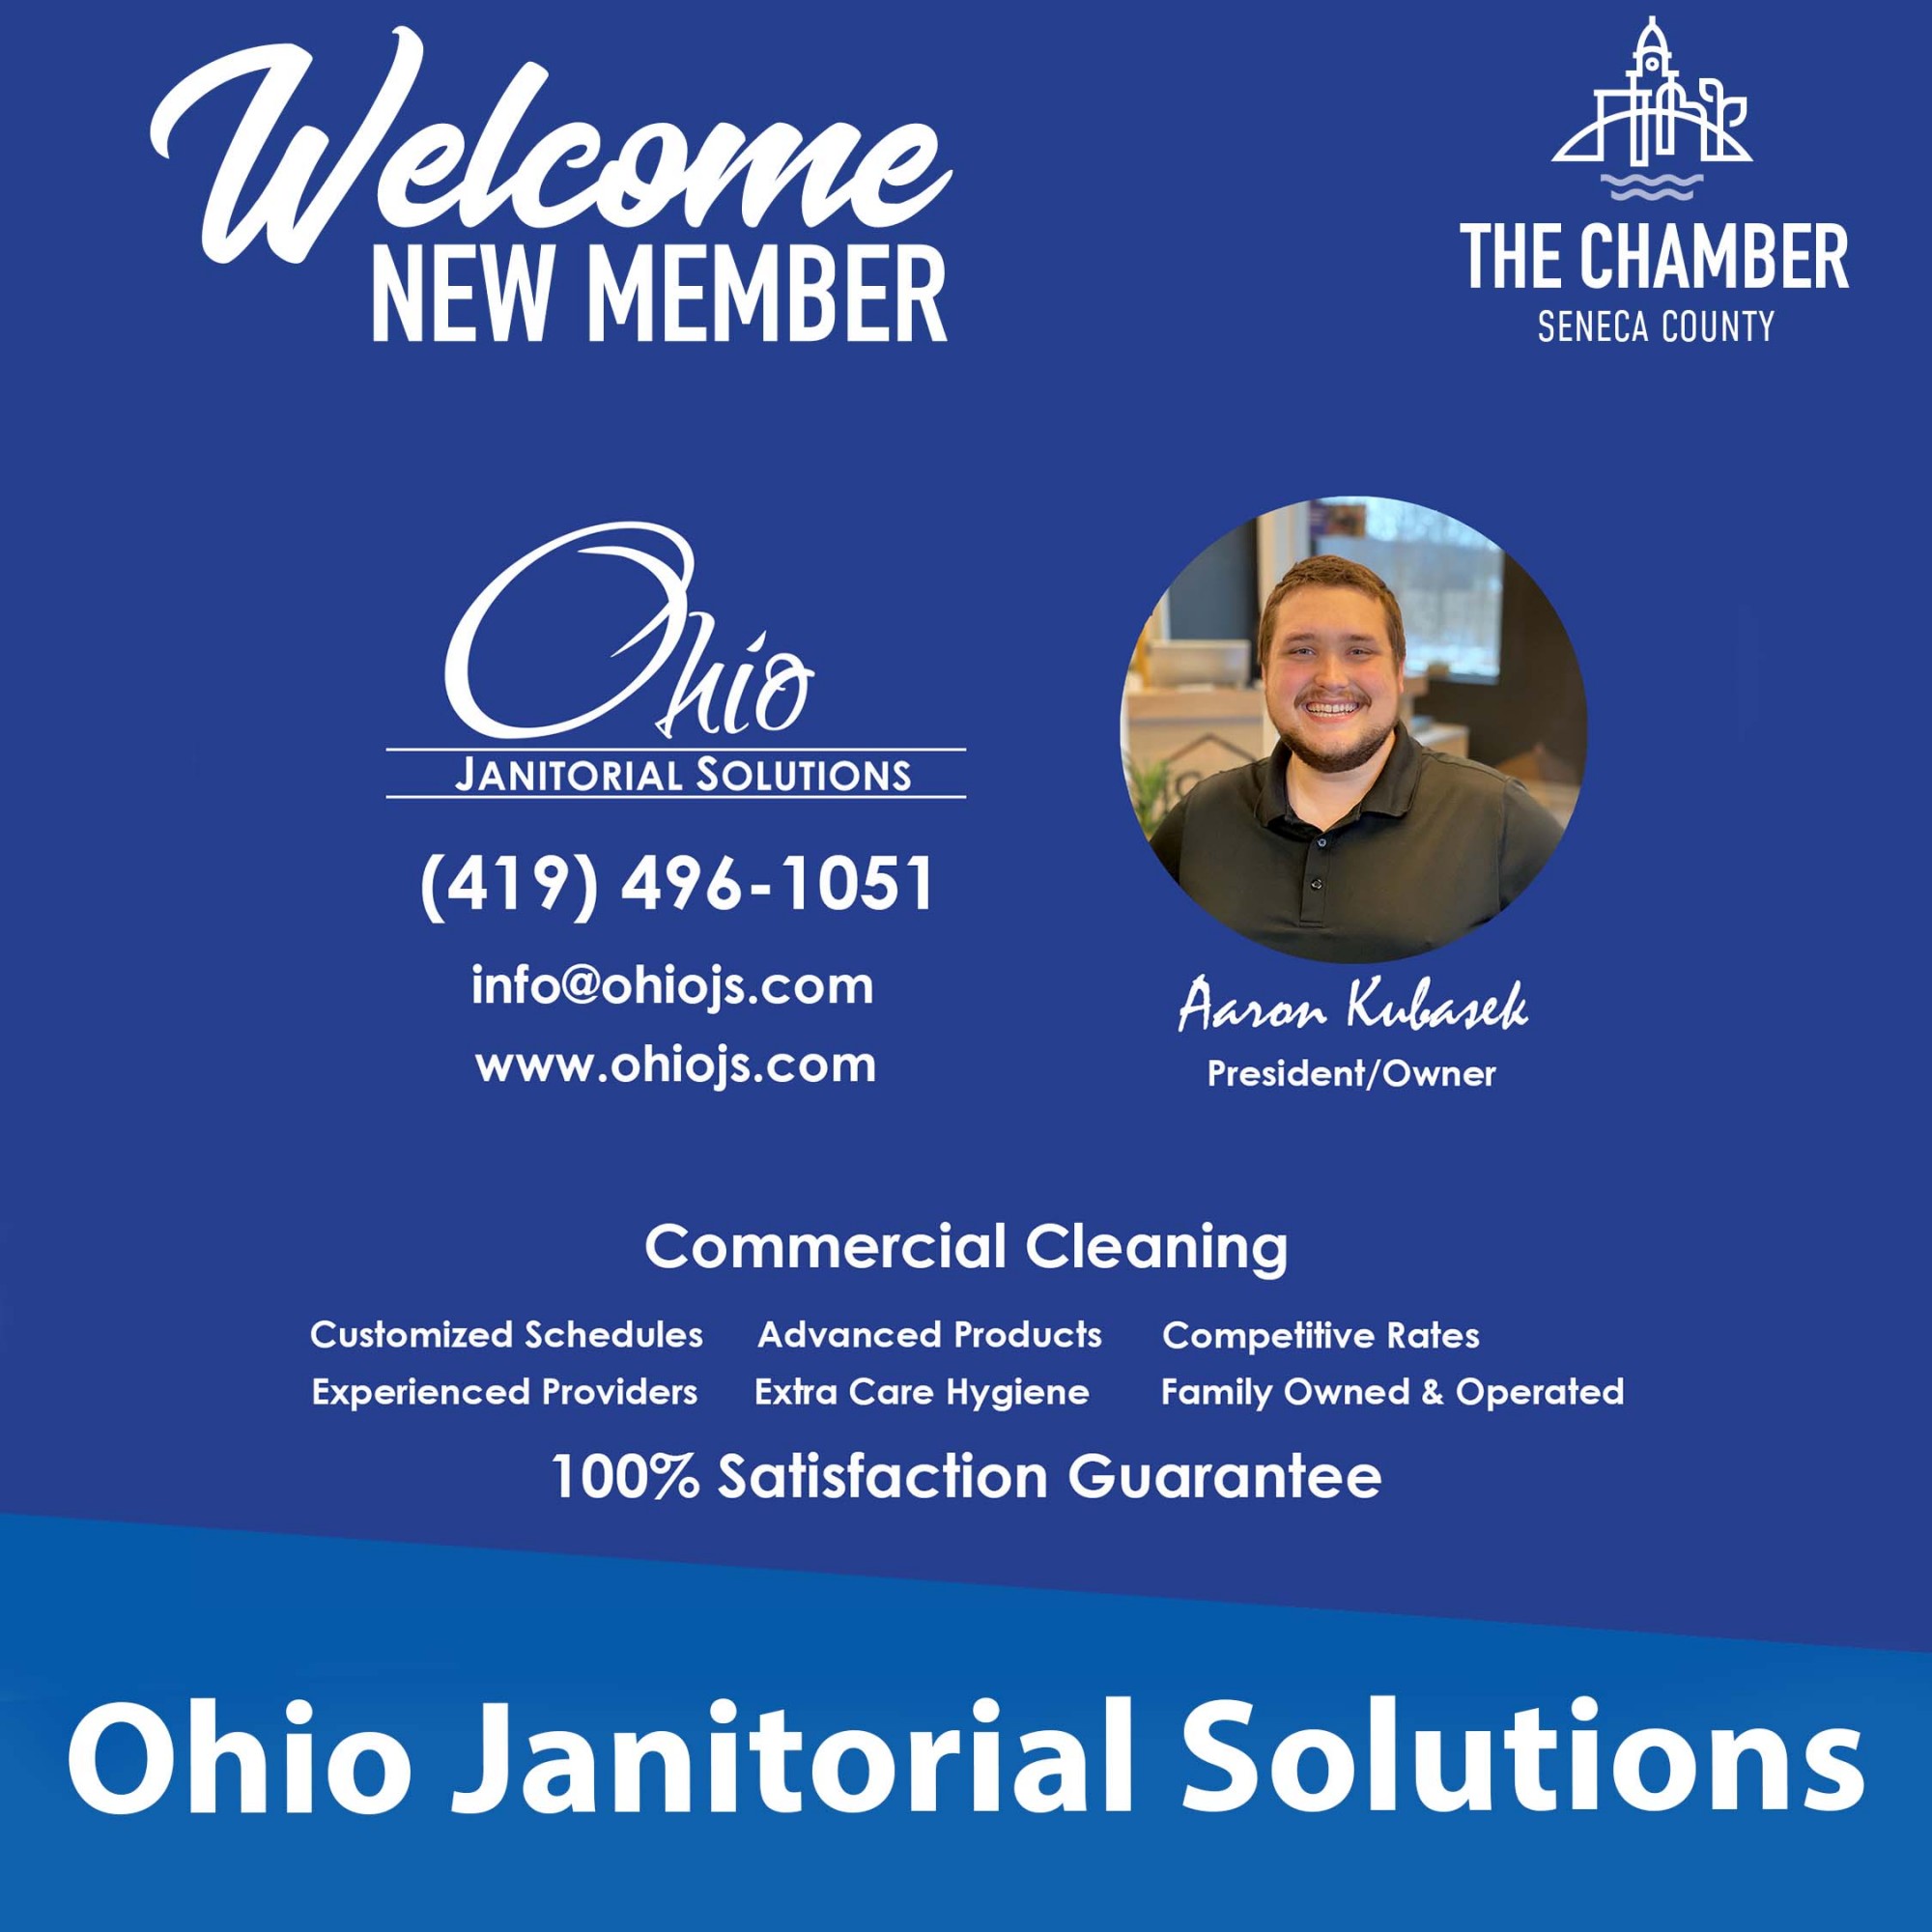 New Member: Ohio Janitorial Solutions